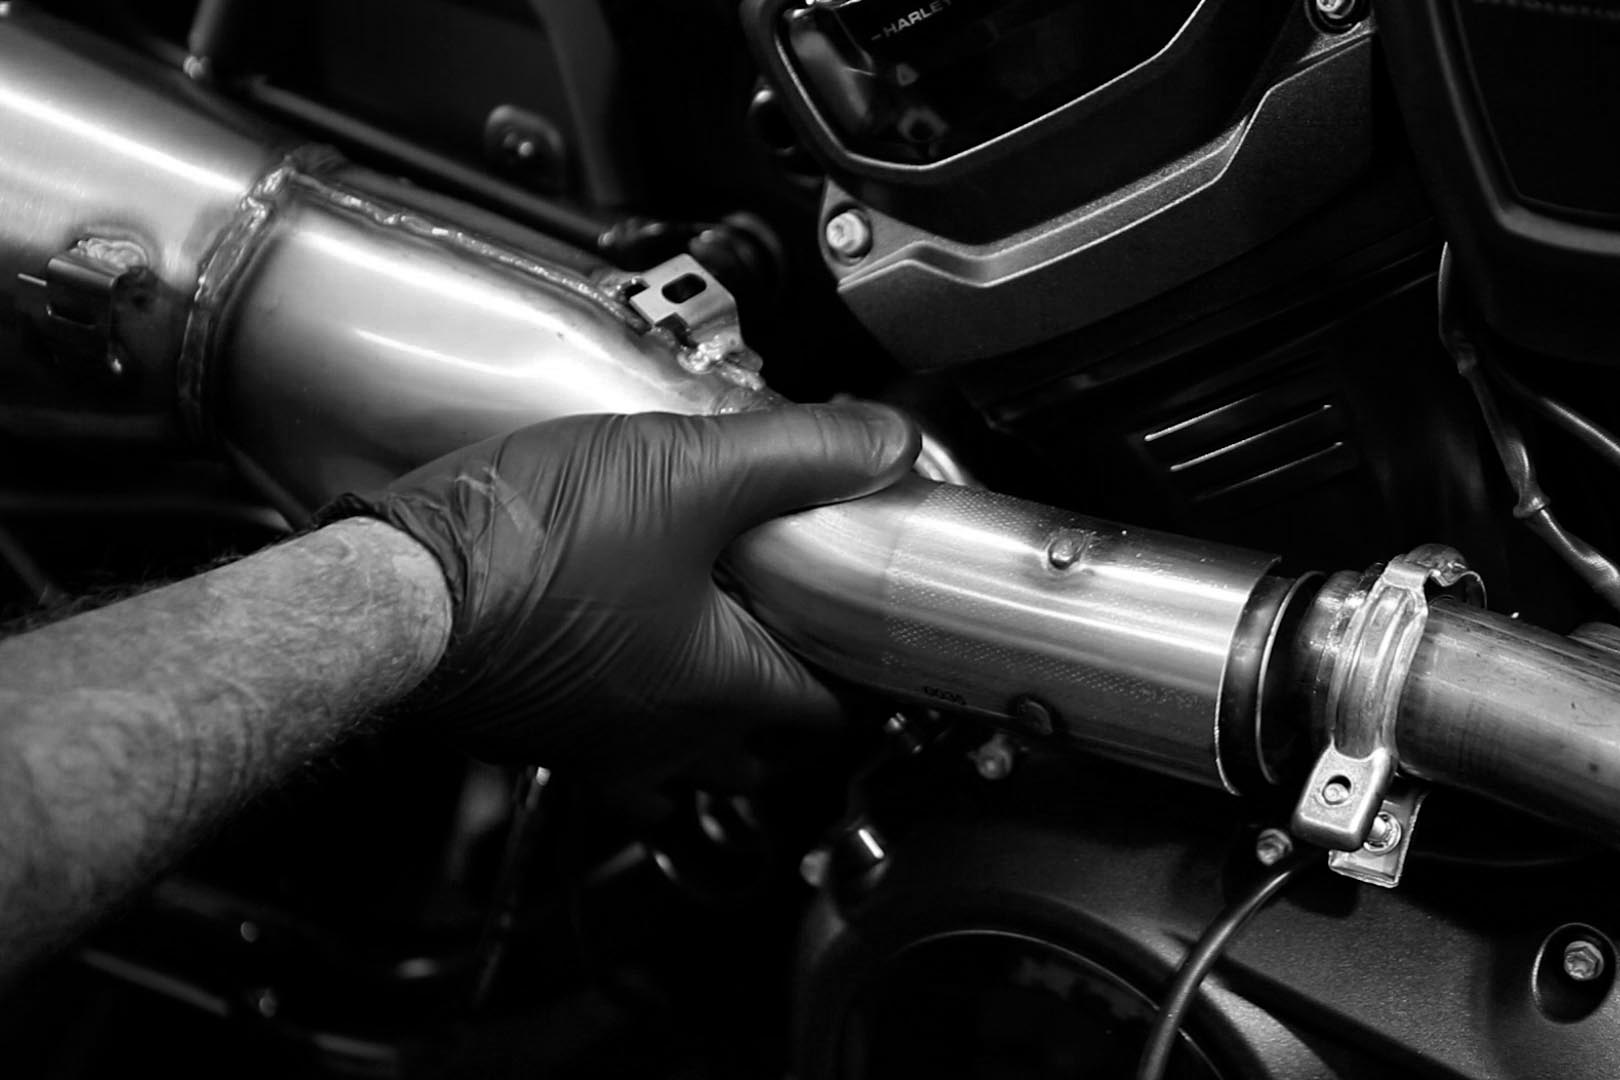 Install your custom Dr. Jekill & Mr. Hyde® Exhaust